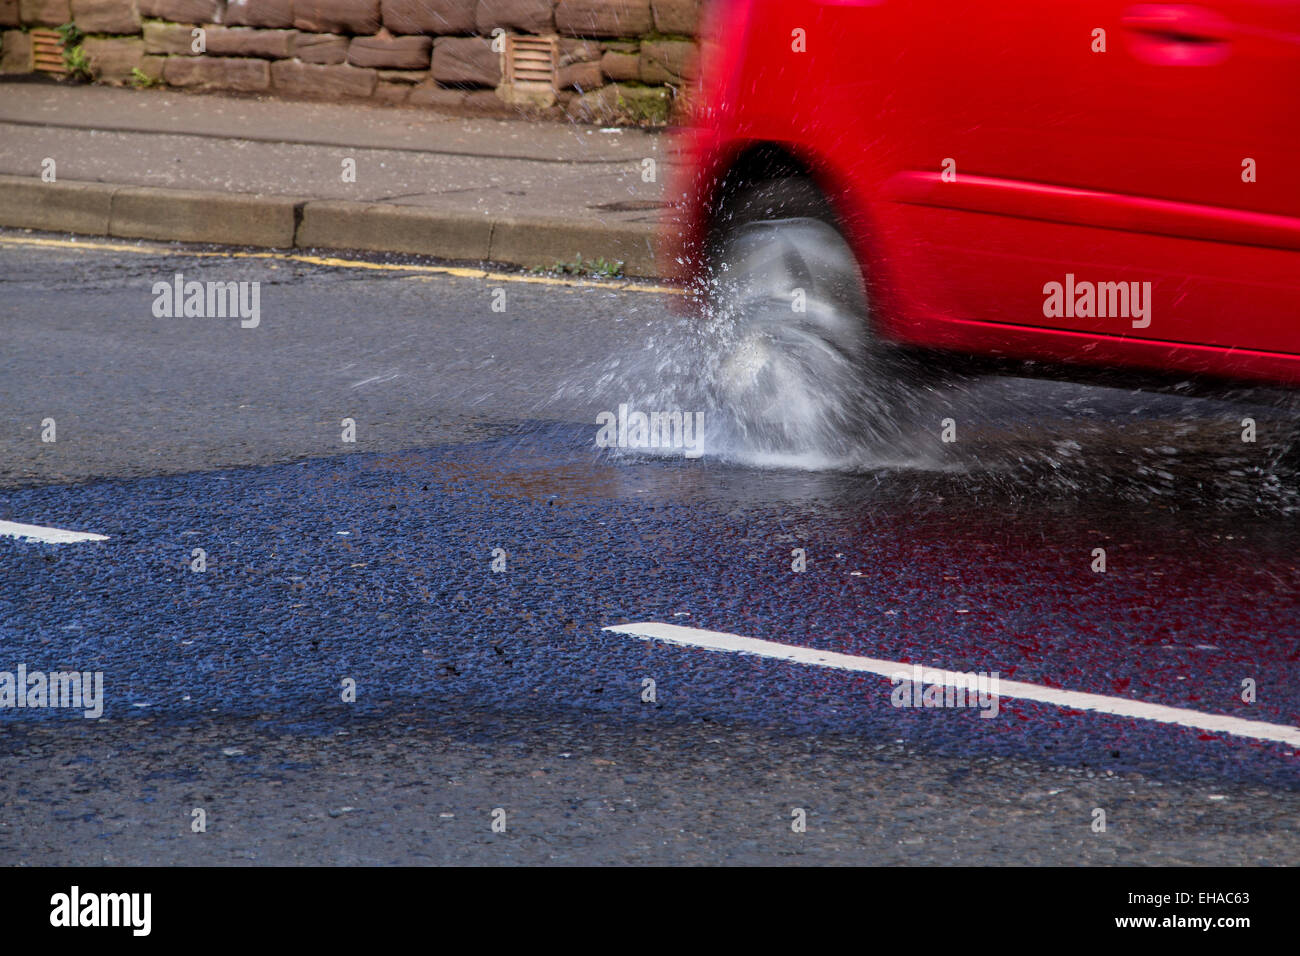 Scottish Drivers struggling to cope with pothole problems along Dens Road in Dundee, UK Stock Photo